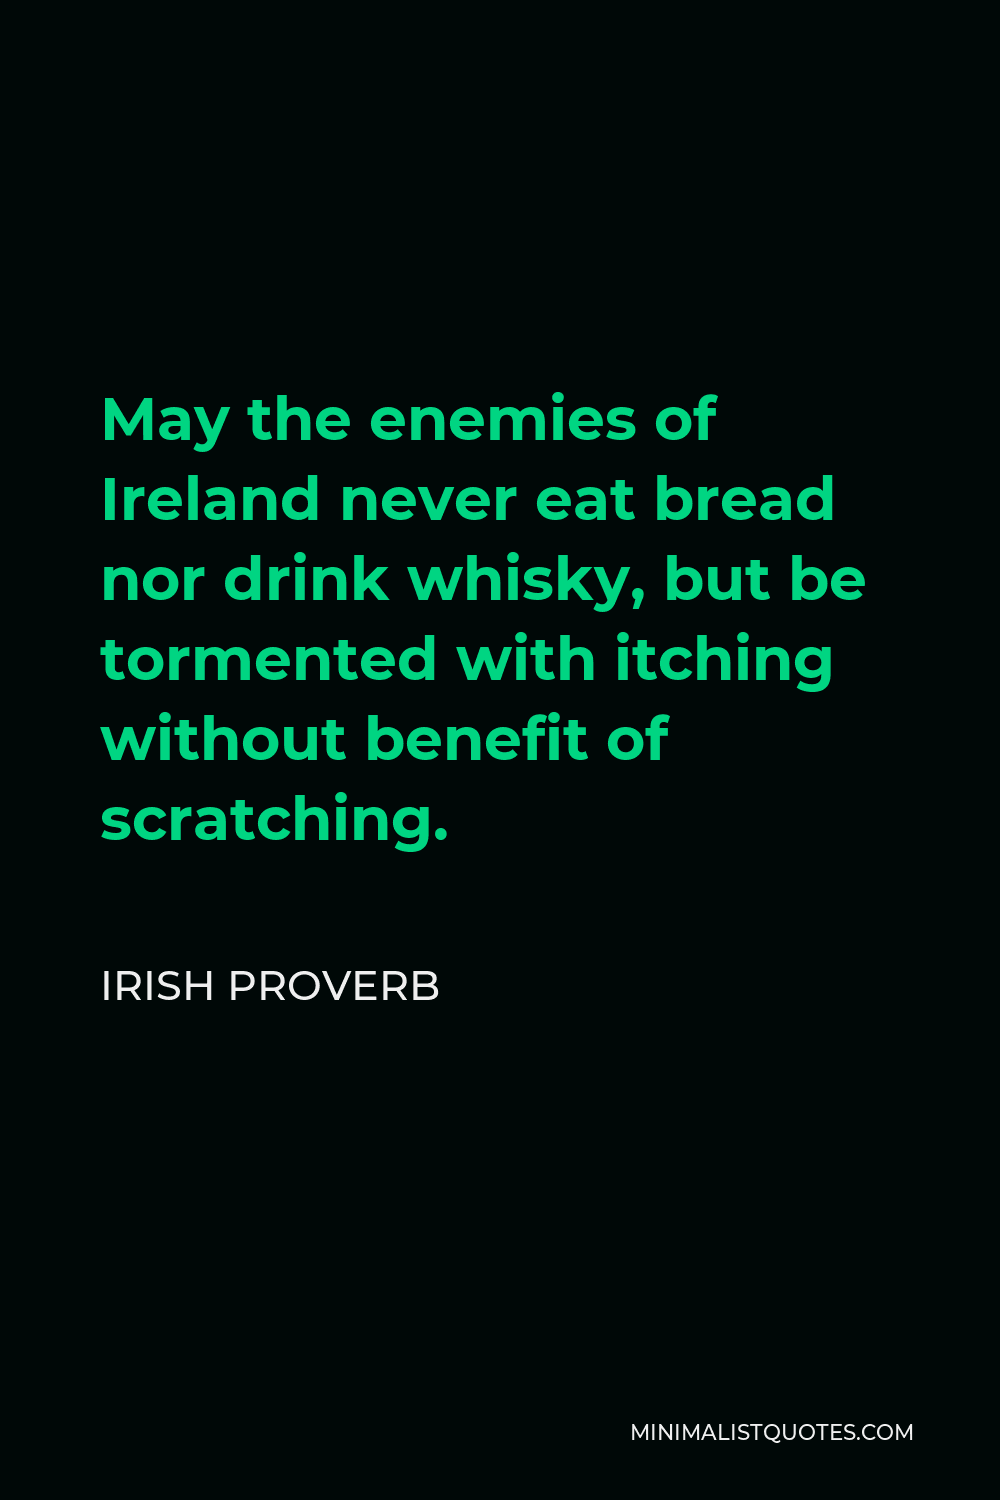 Irish Proverb Quote - May the enemies of Ireland never eat bread nor drink whisky, but be tormented with itching without benefit of scratching.